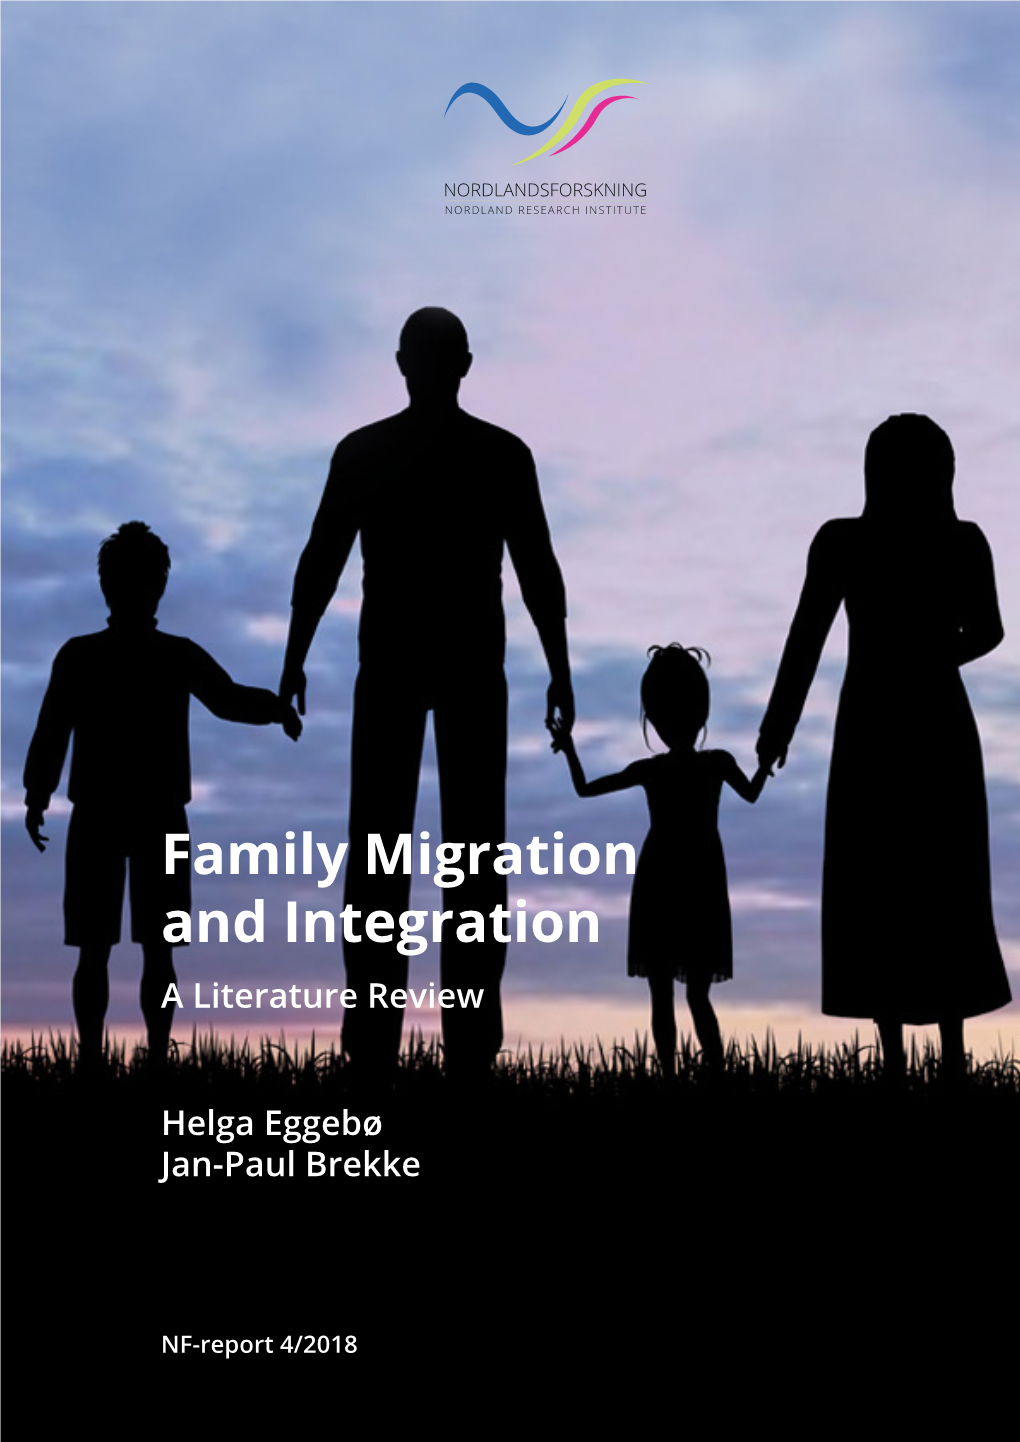 Family Migration and Integration, with a Particular Focus on How Immigration Regulations Affect Integration